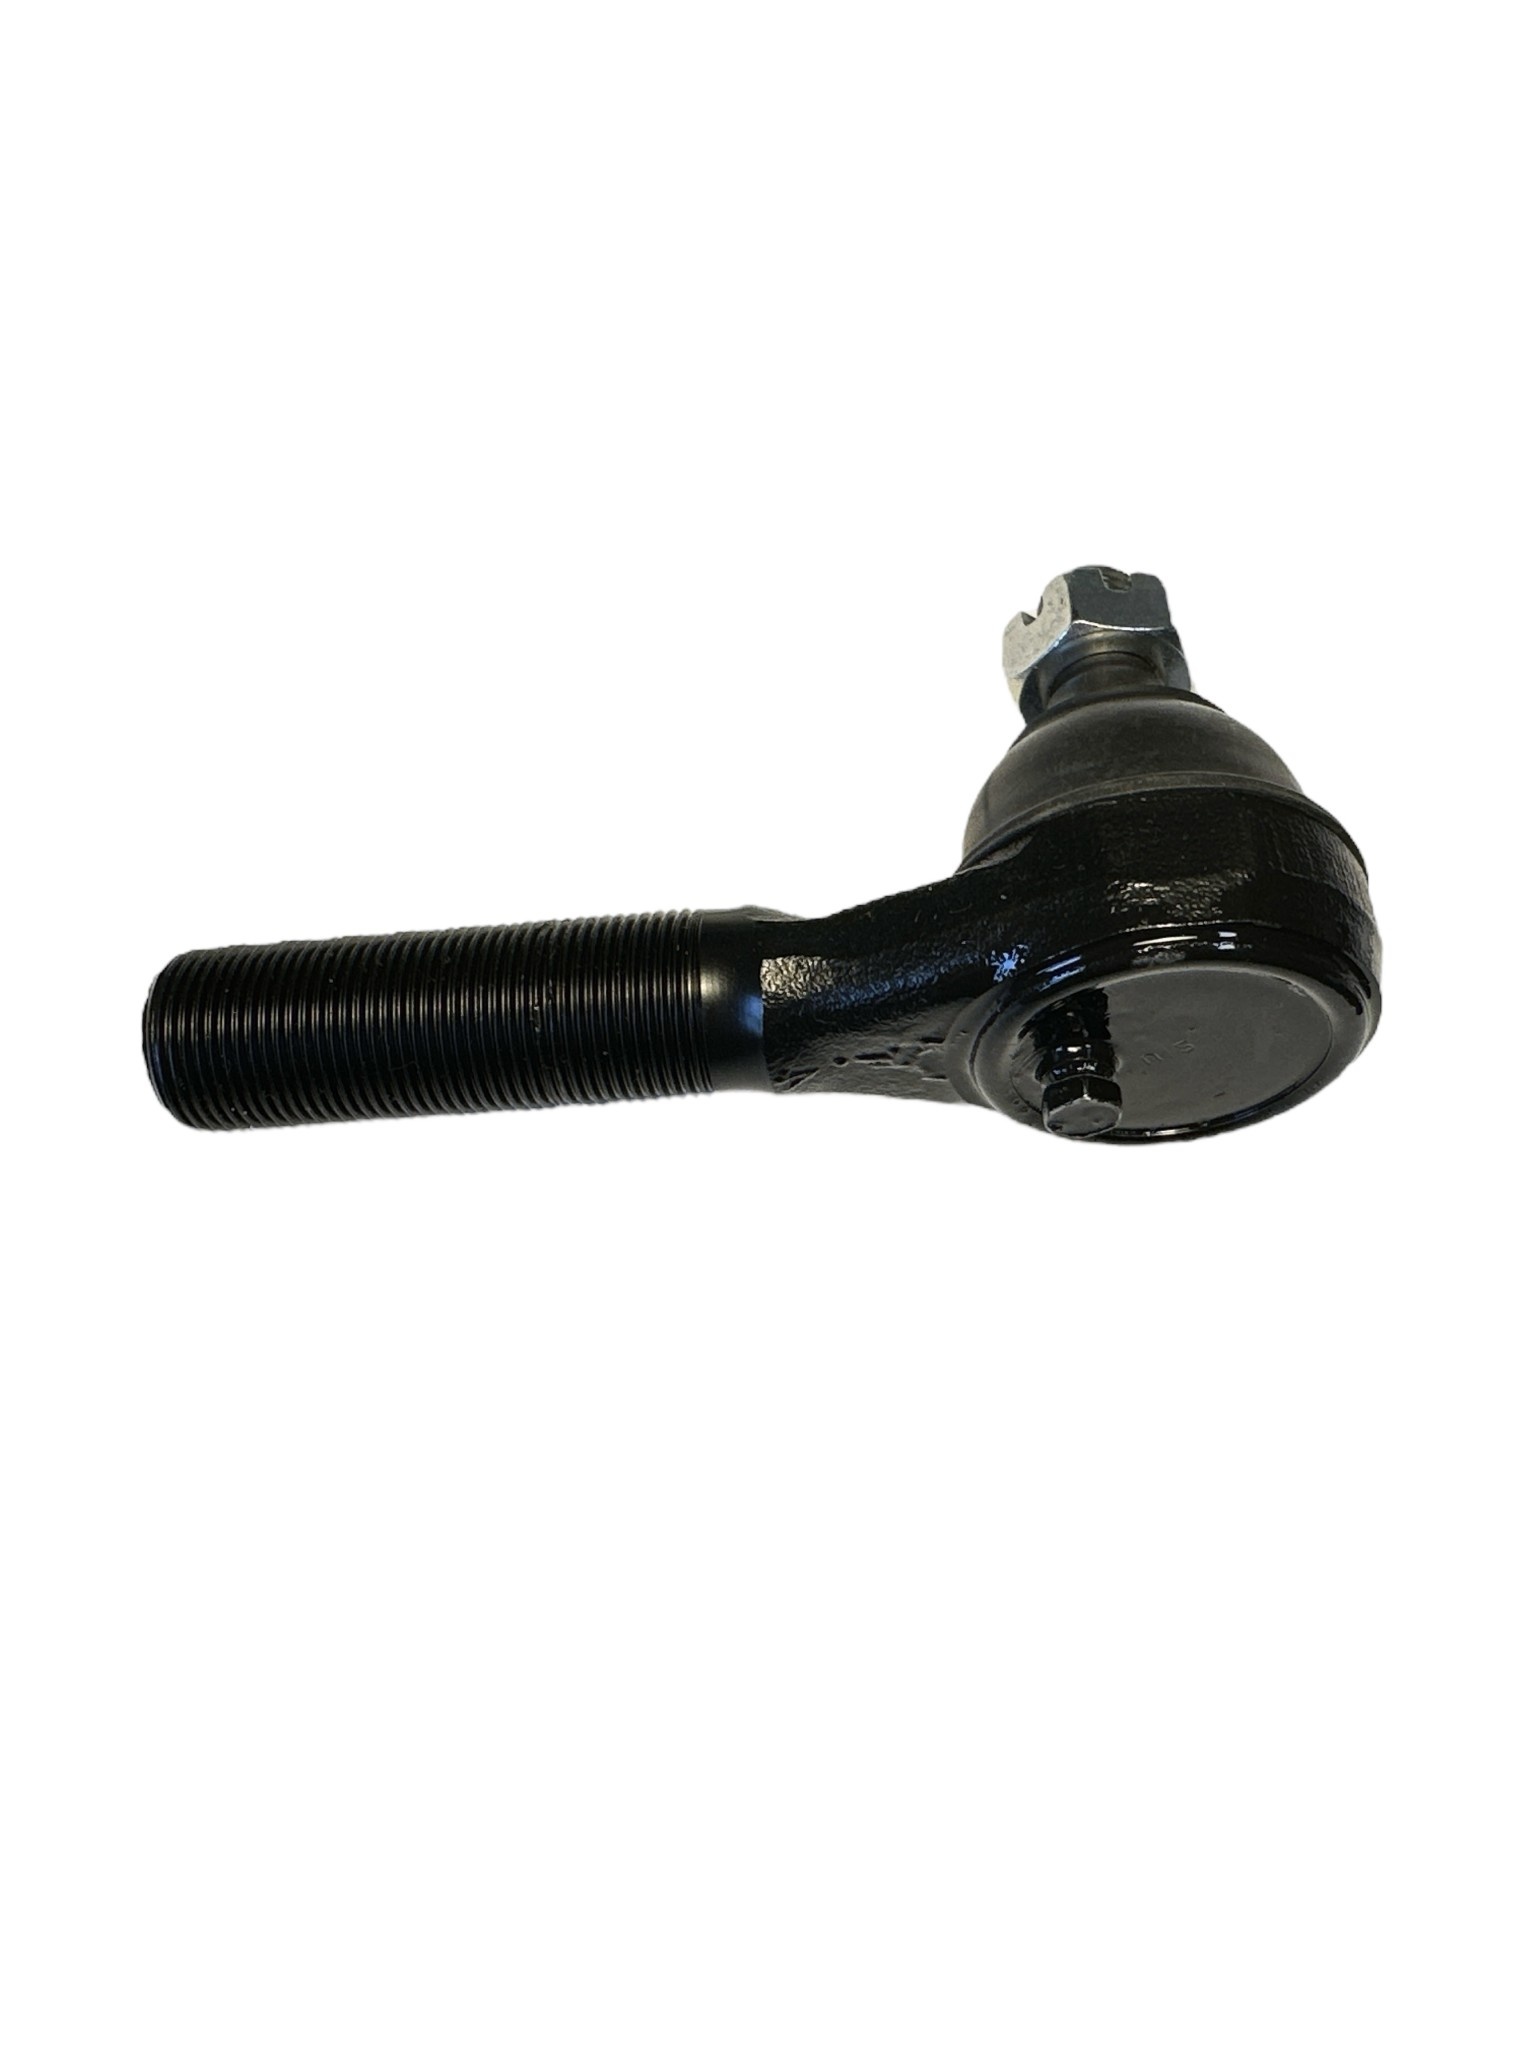 Tie Rod End, RH Outer (male threads) - Nissan Safari & GQ Patrol (up to 07/1992) Japan - 48520-01J00